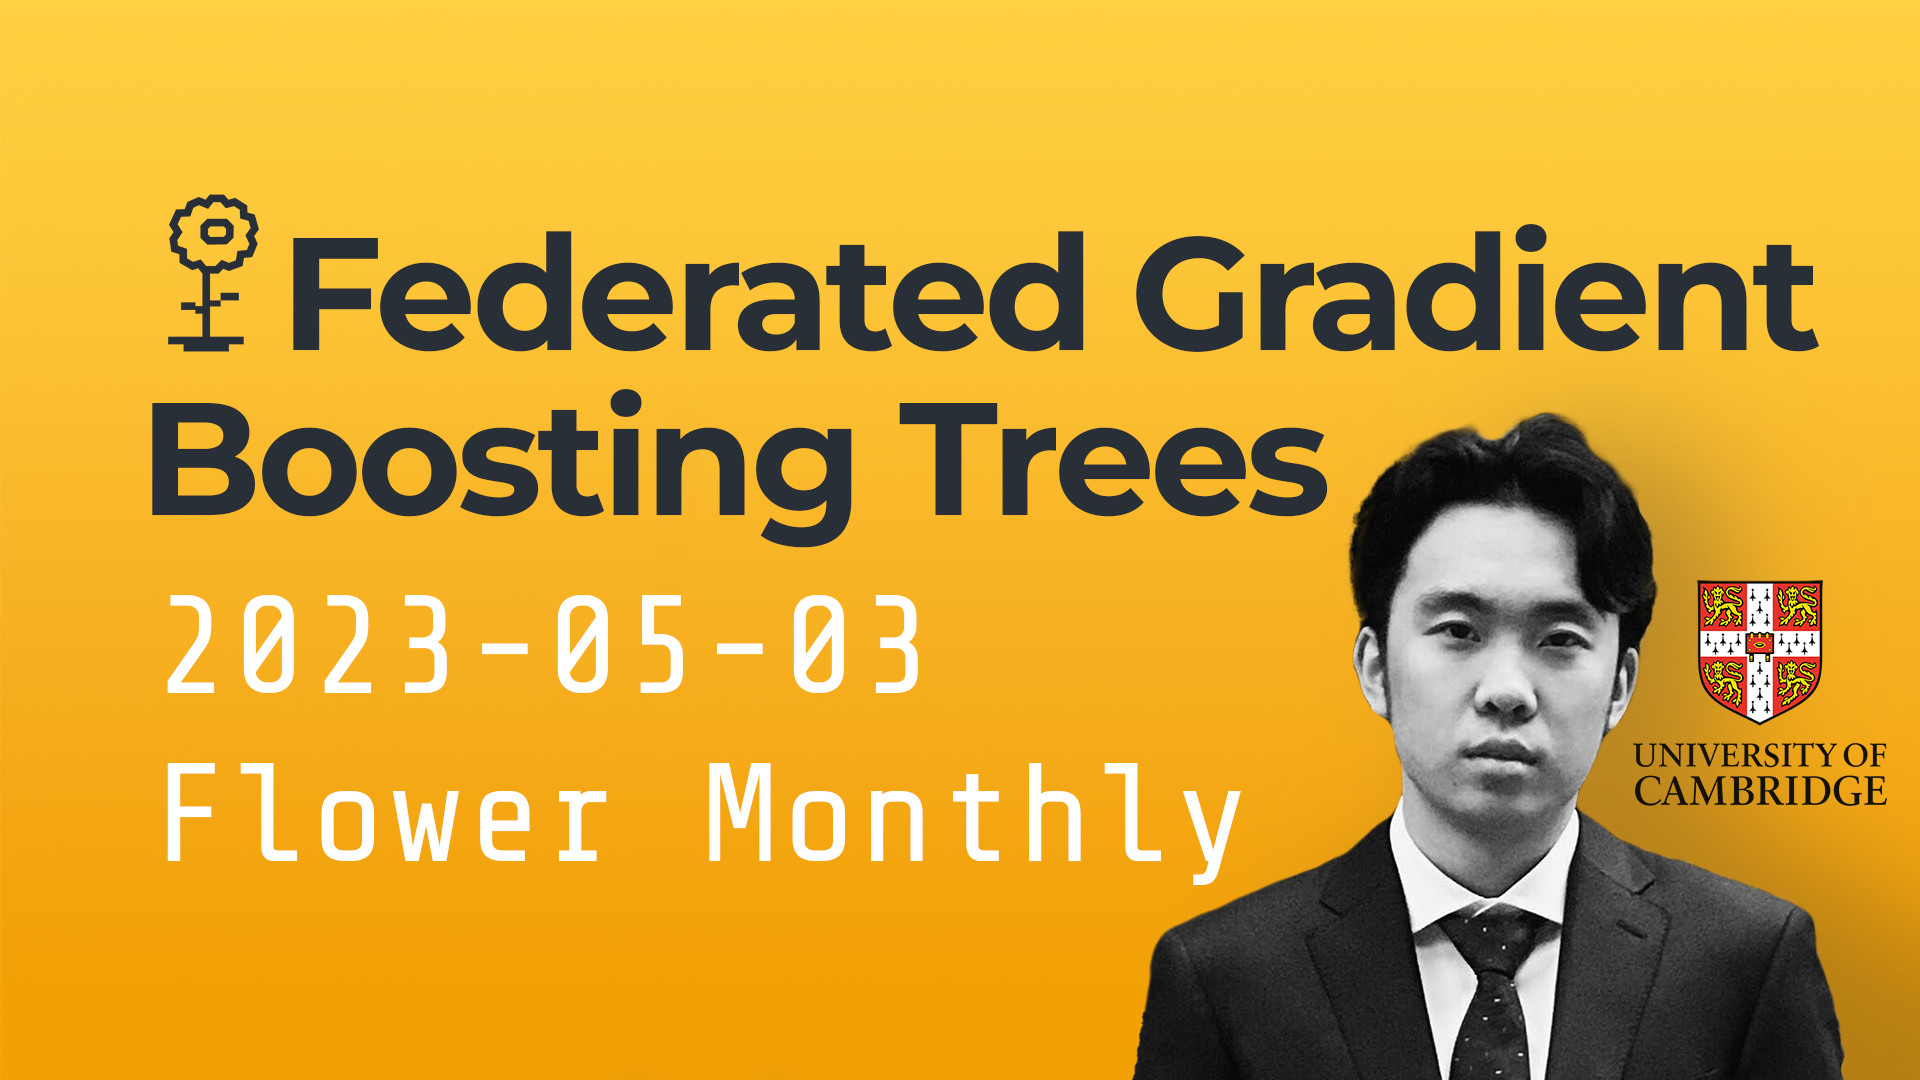 Federated Gradient Boosting Trees